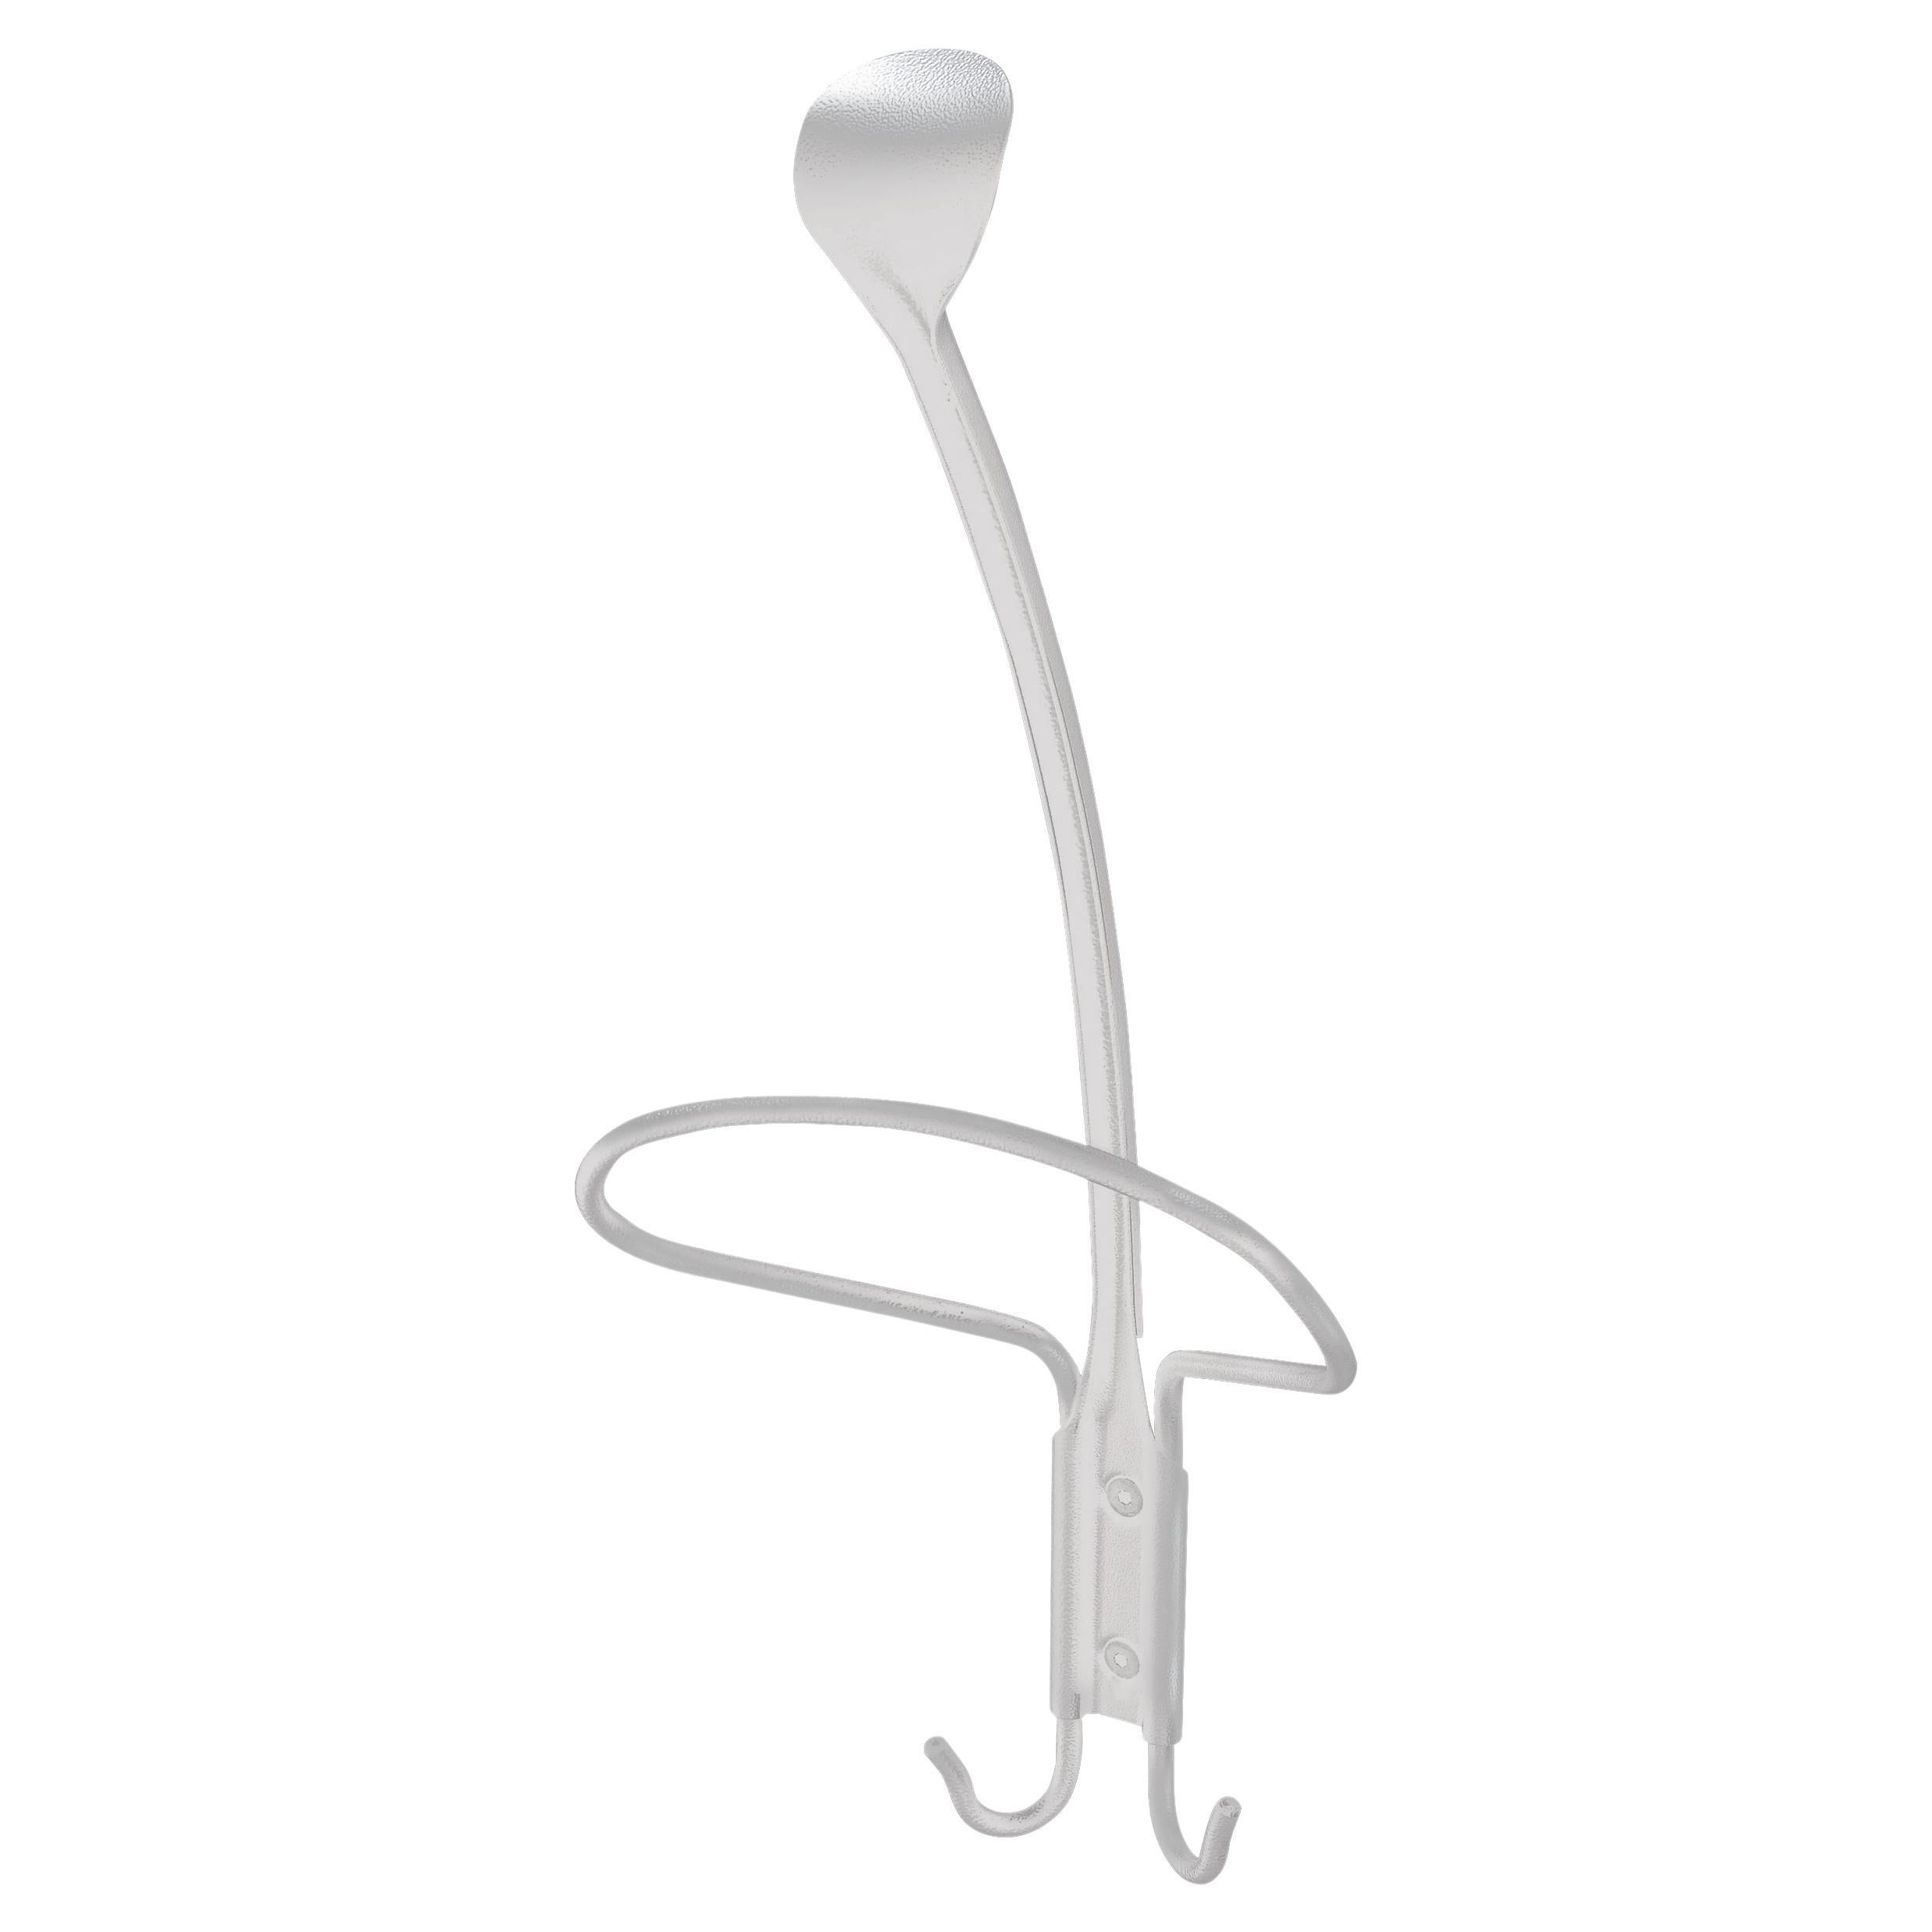 Zanotta Museo Coat Hanger in White Painted Steel with Scratch-Resistant Finish For Sale